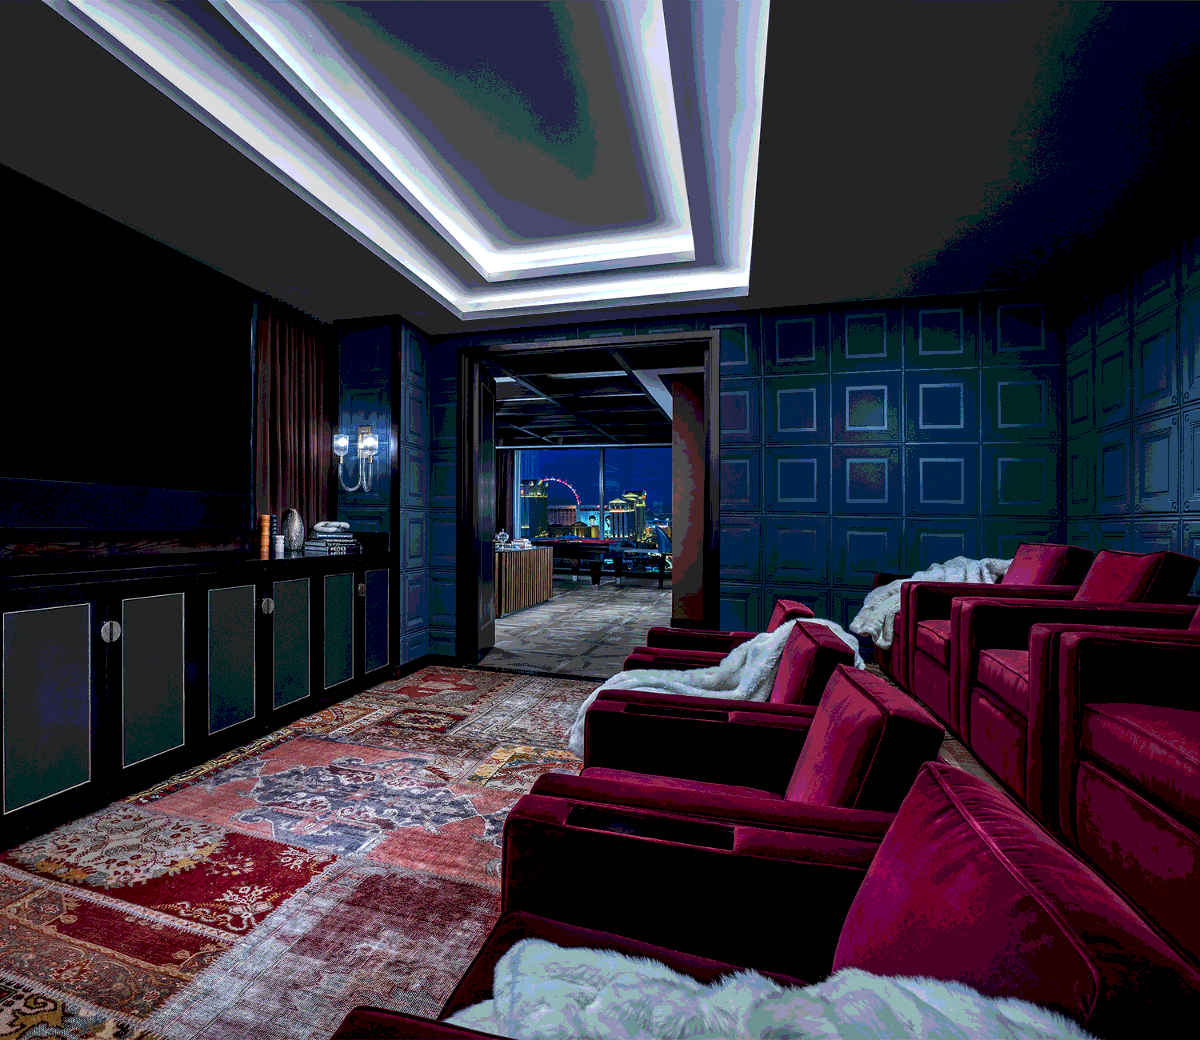 Two banks of plush chairs face the screen in this movie room